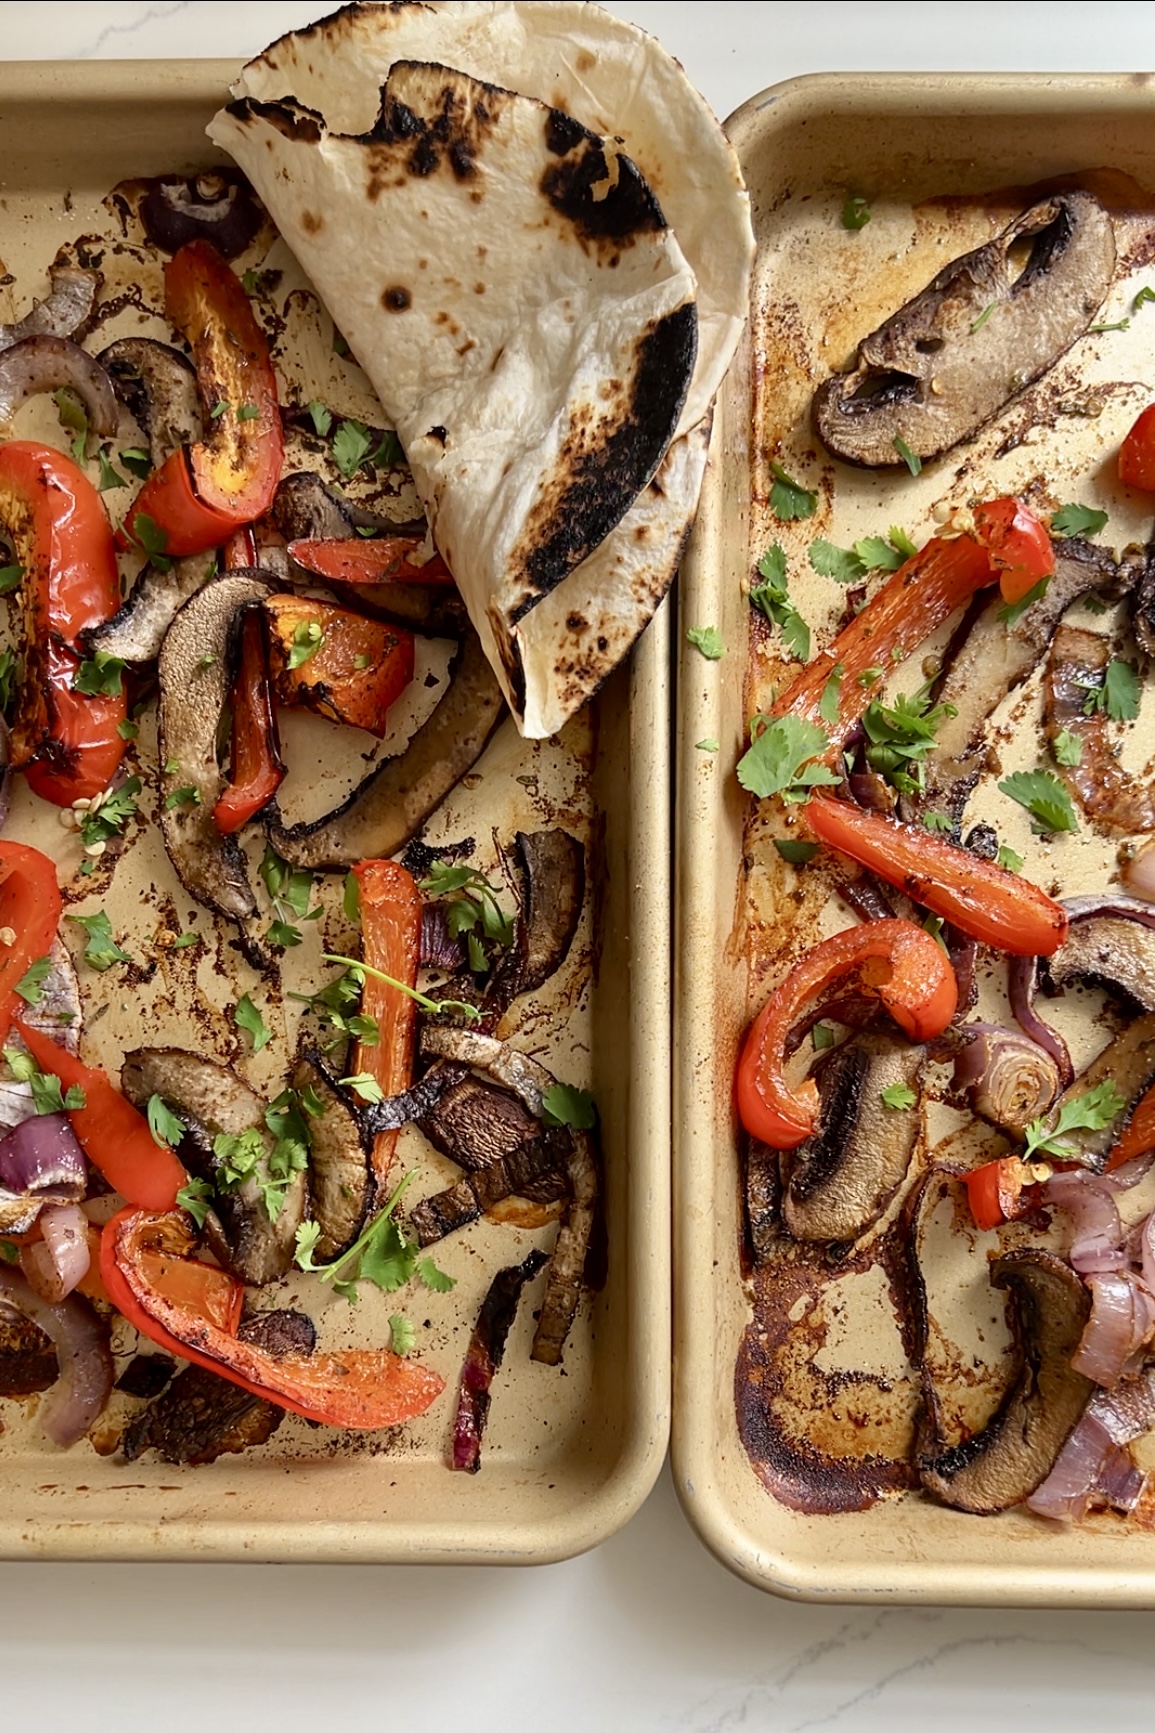 Two sheet pans filled with roasted vegetables, including red bell peppers, red onions, and portobello mushrooms. The seasoned veggies are garnished with fresh cilantro. A slightly charred flour tortilla is placed in the top left corner, partially covering some vegetables—perfect for a fajitas recipe.